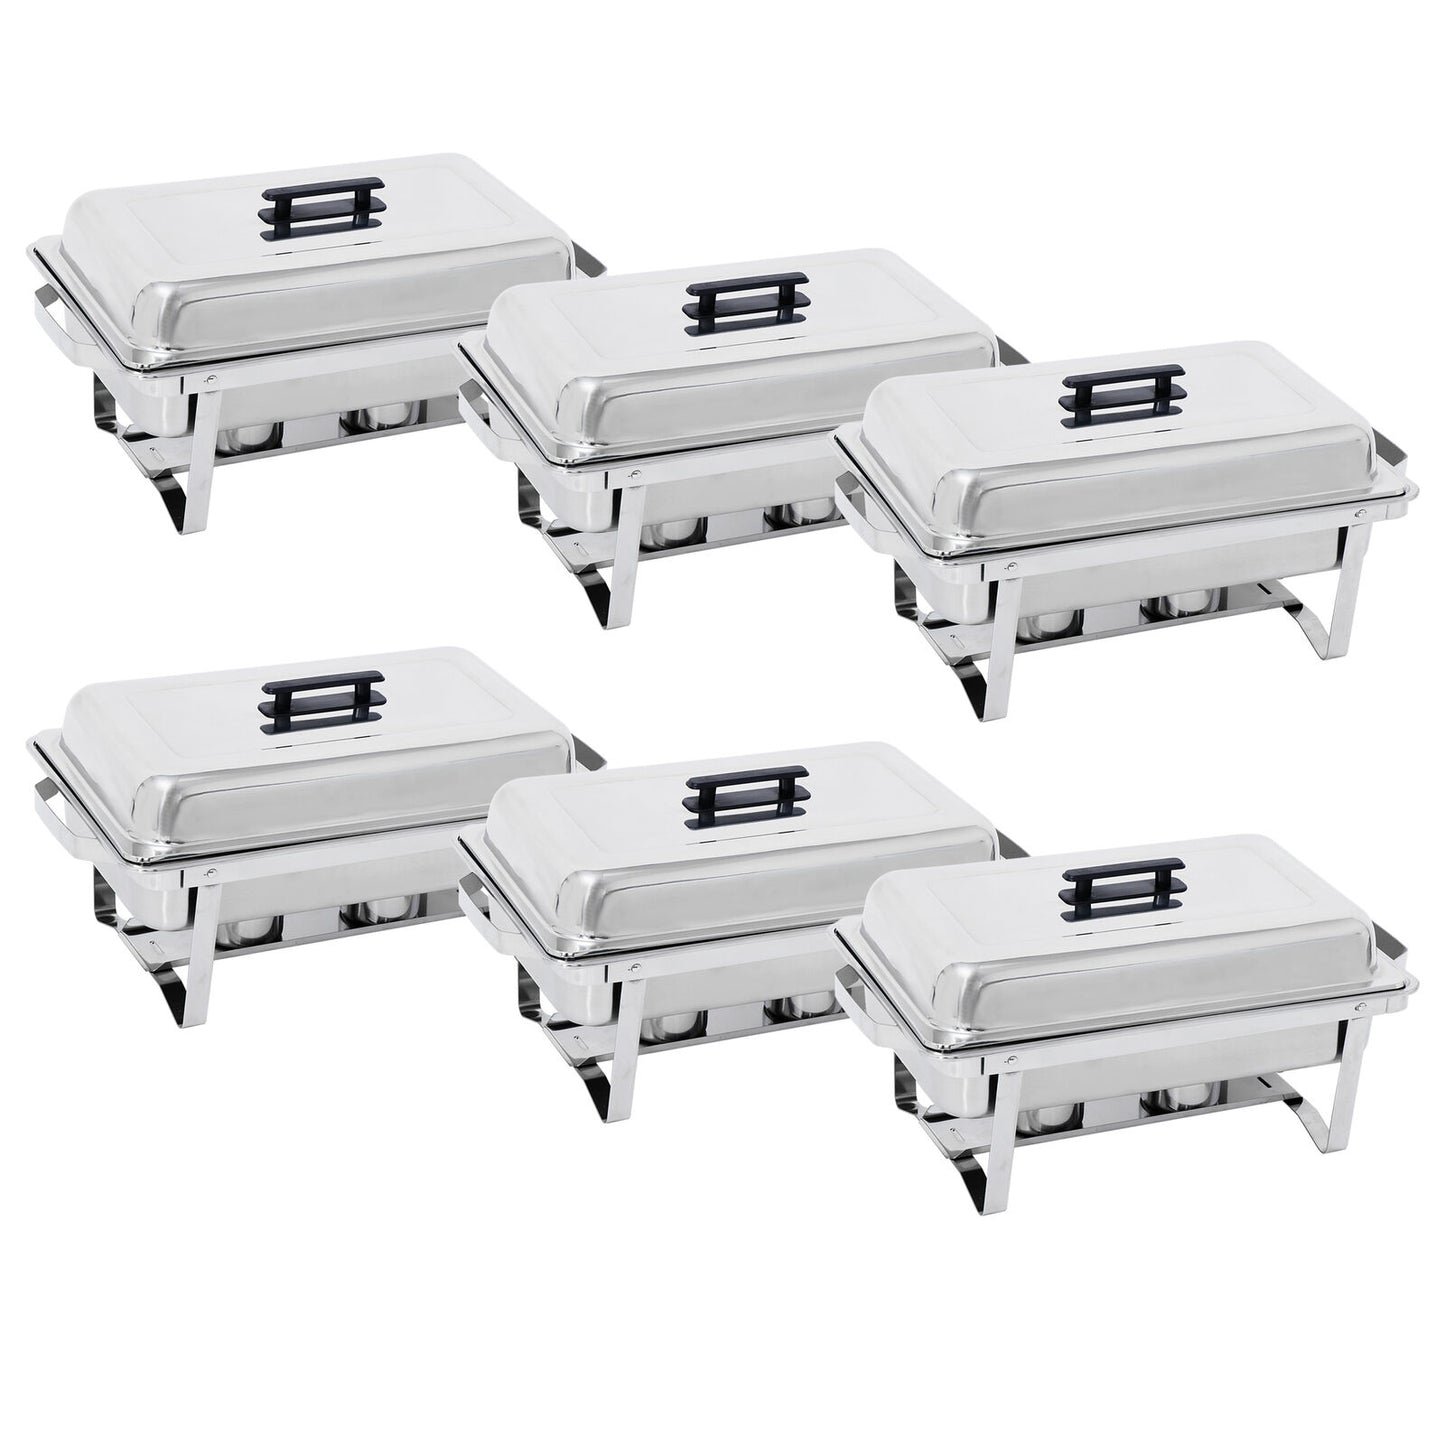 6 Pack 8QT Chafing Dish Stainless Steel Chafer Complete Set with Warmer